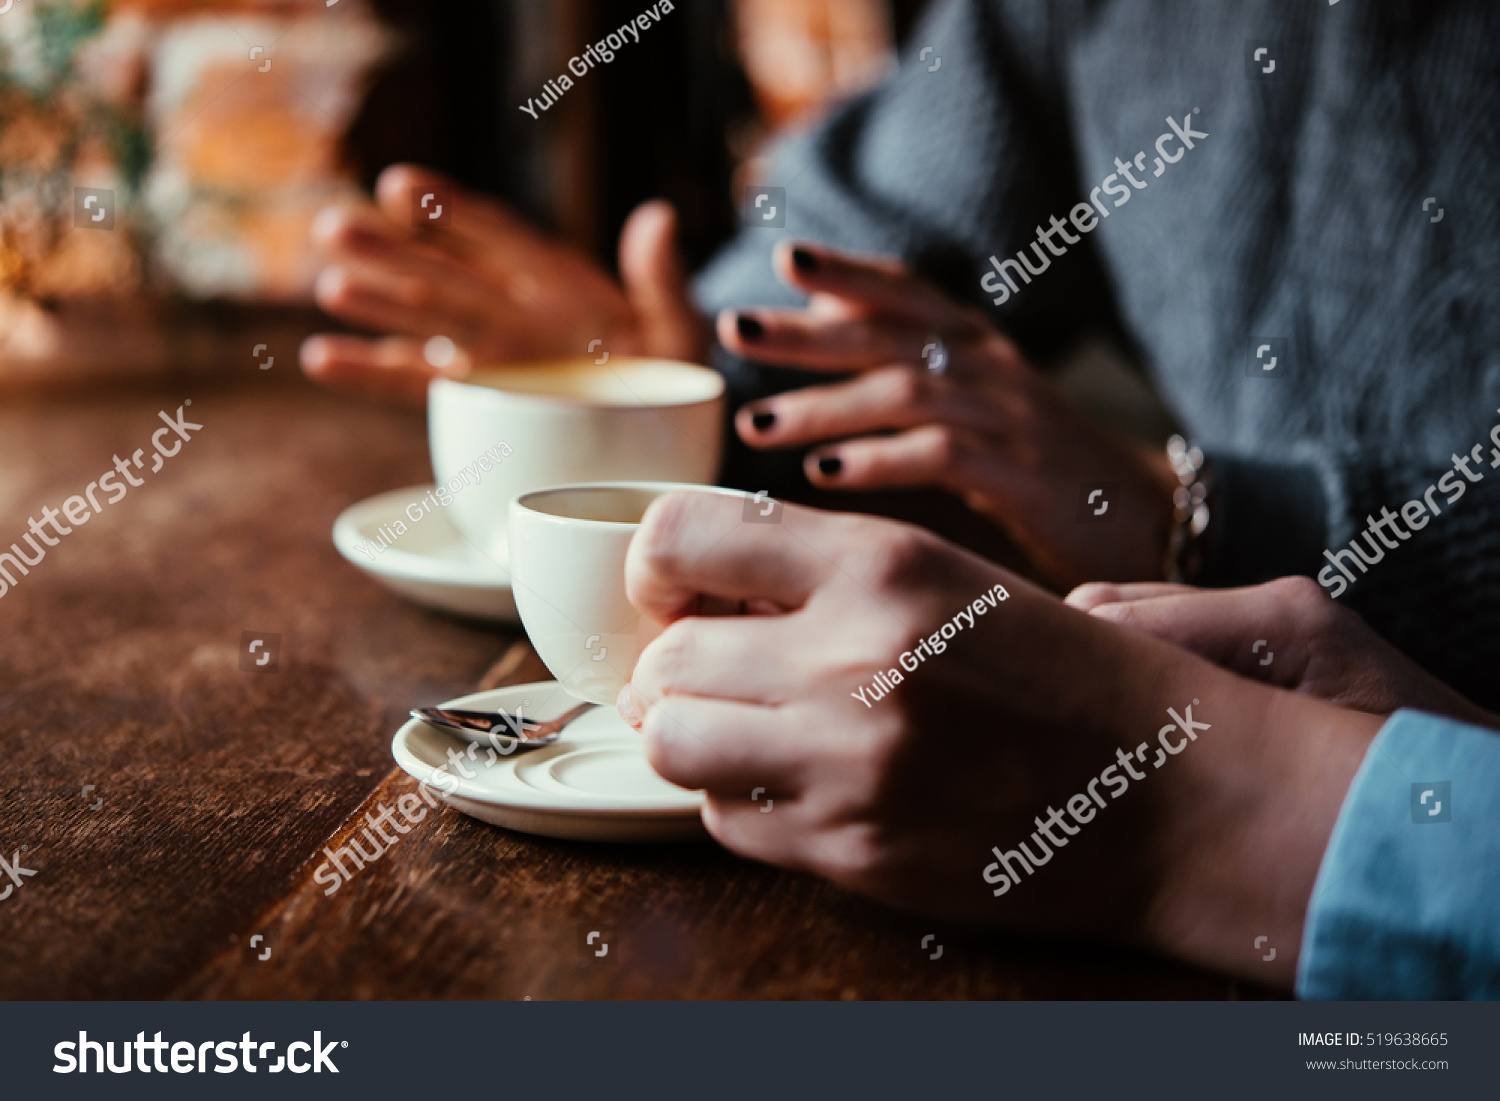 Two women discussing business projects in a cafe while having coffee #519638665